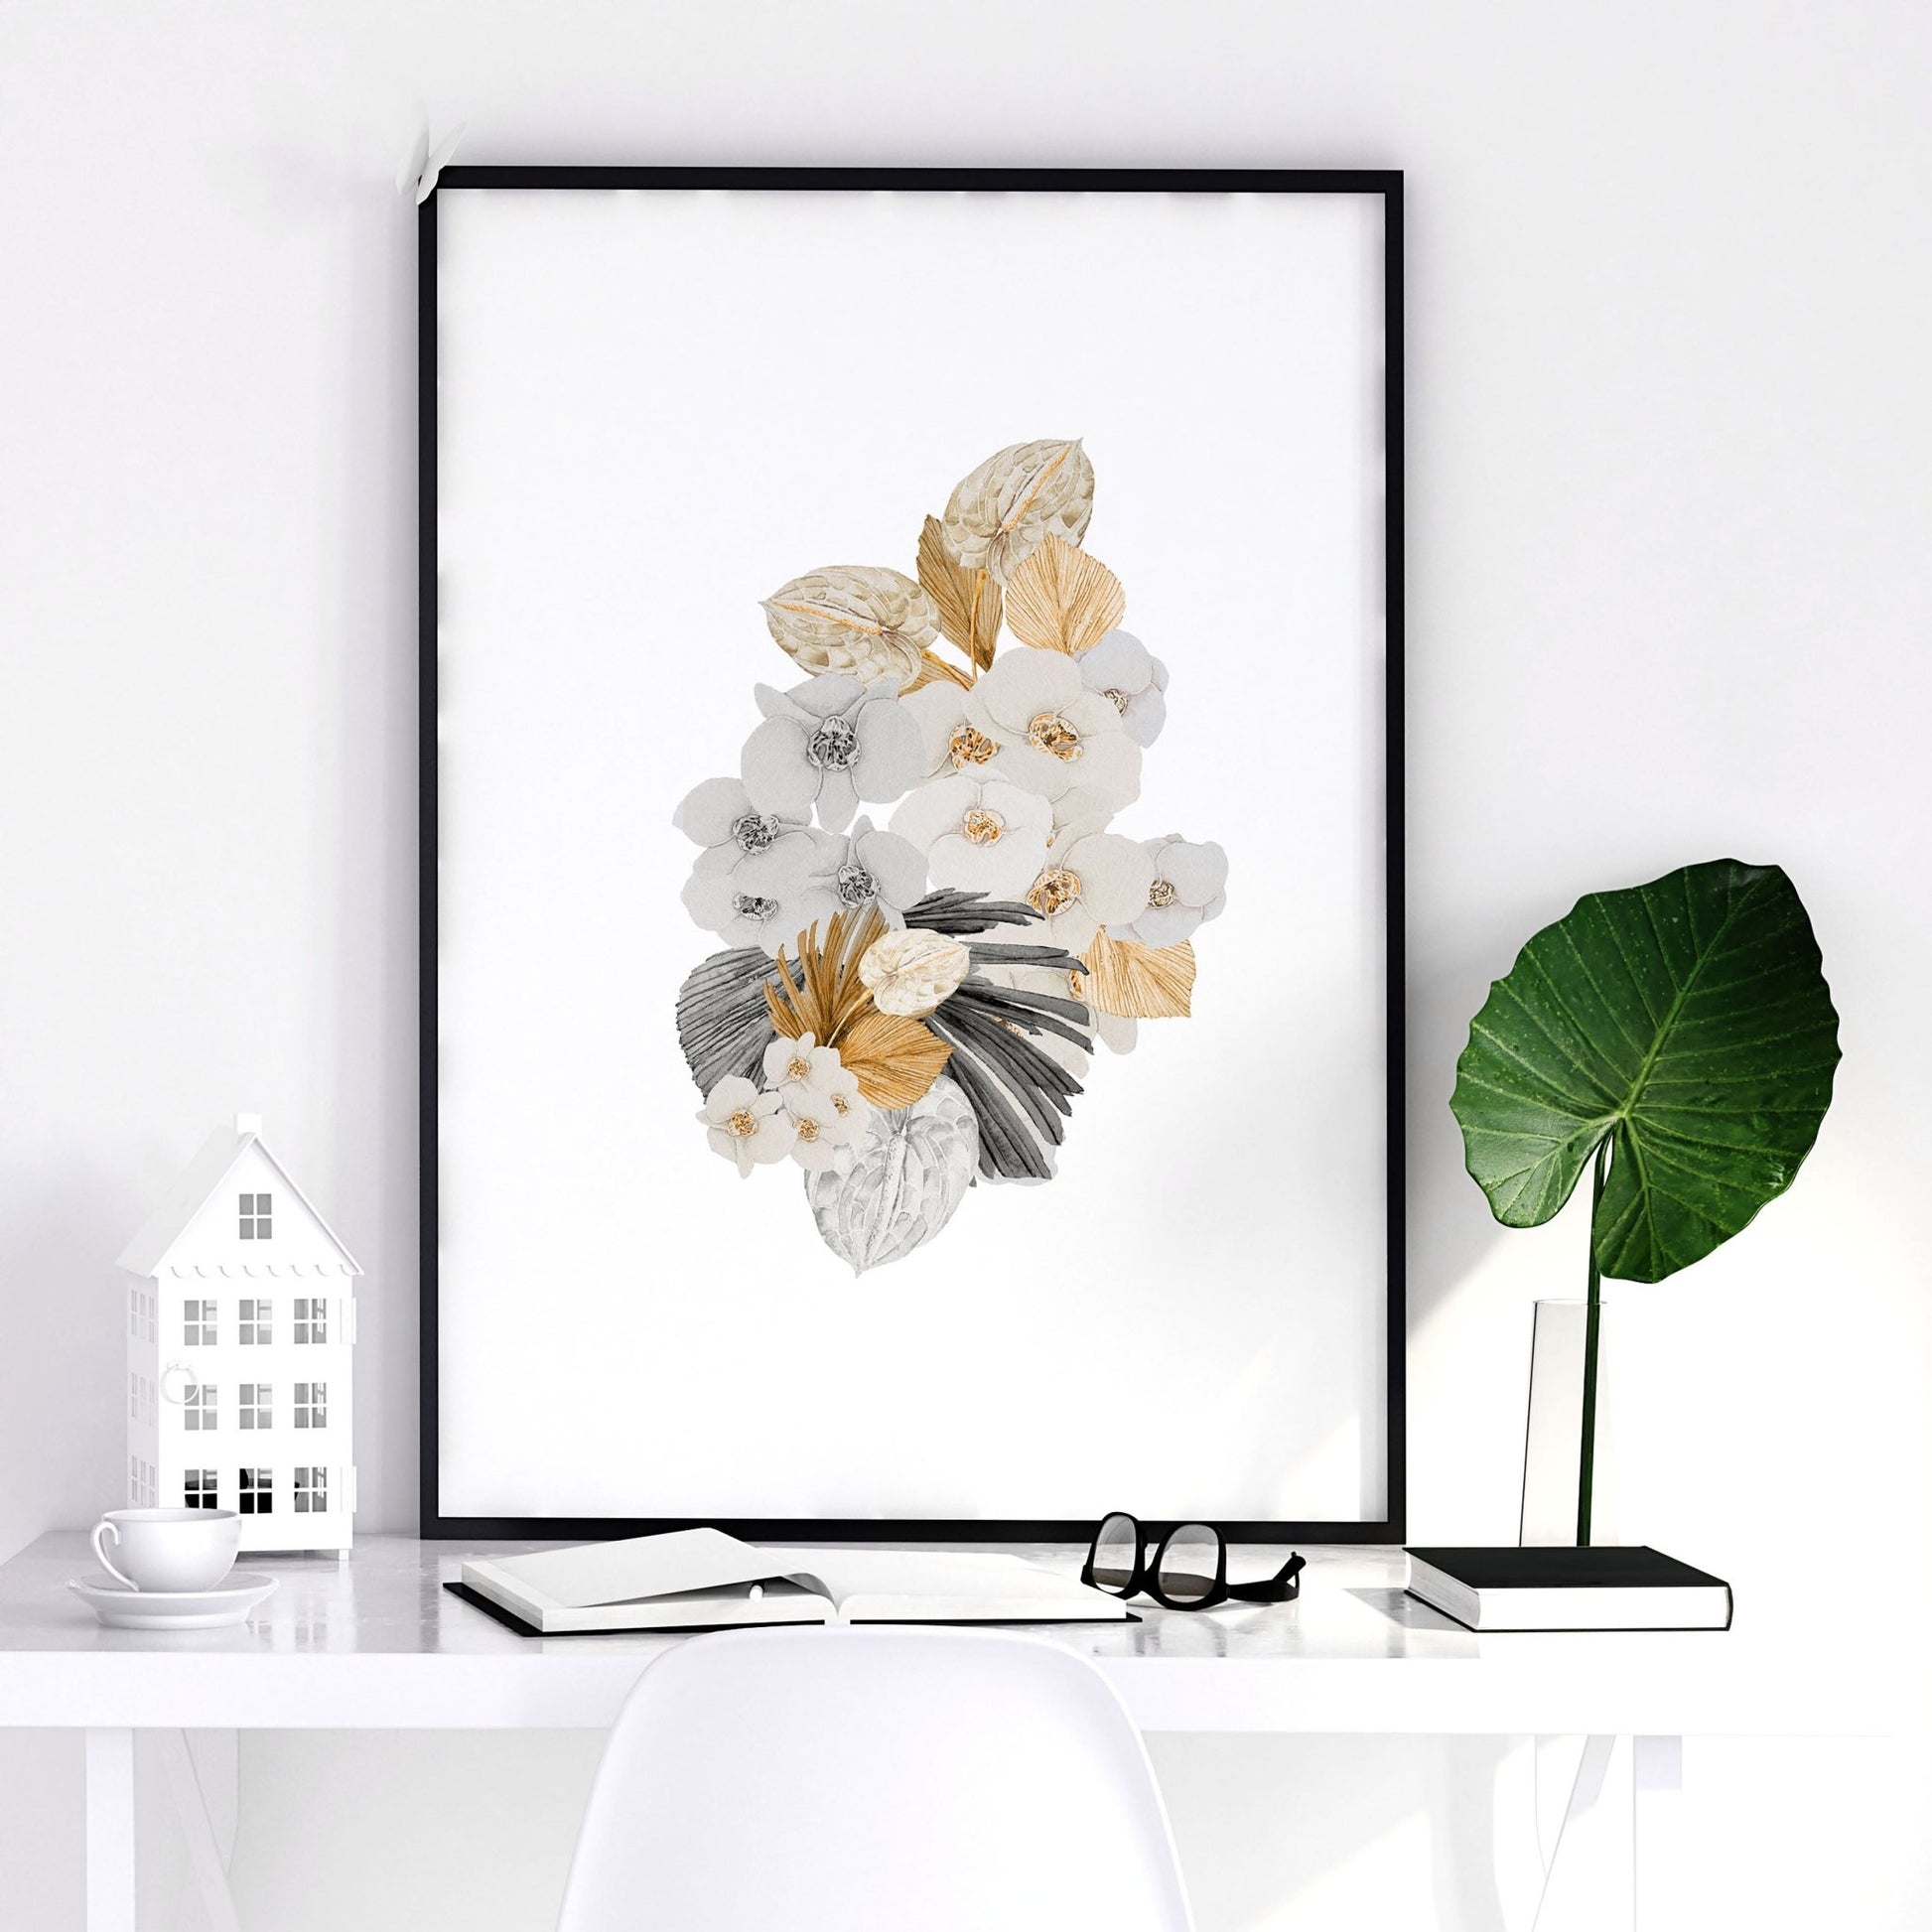 Art for office wall | set of 3 wall art prints - About Wall Art